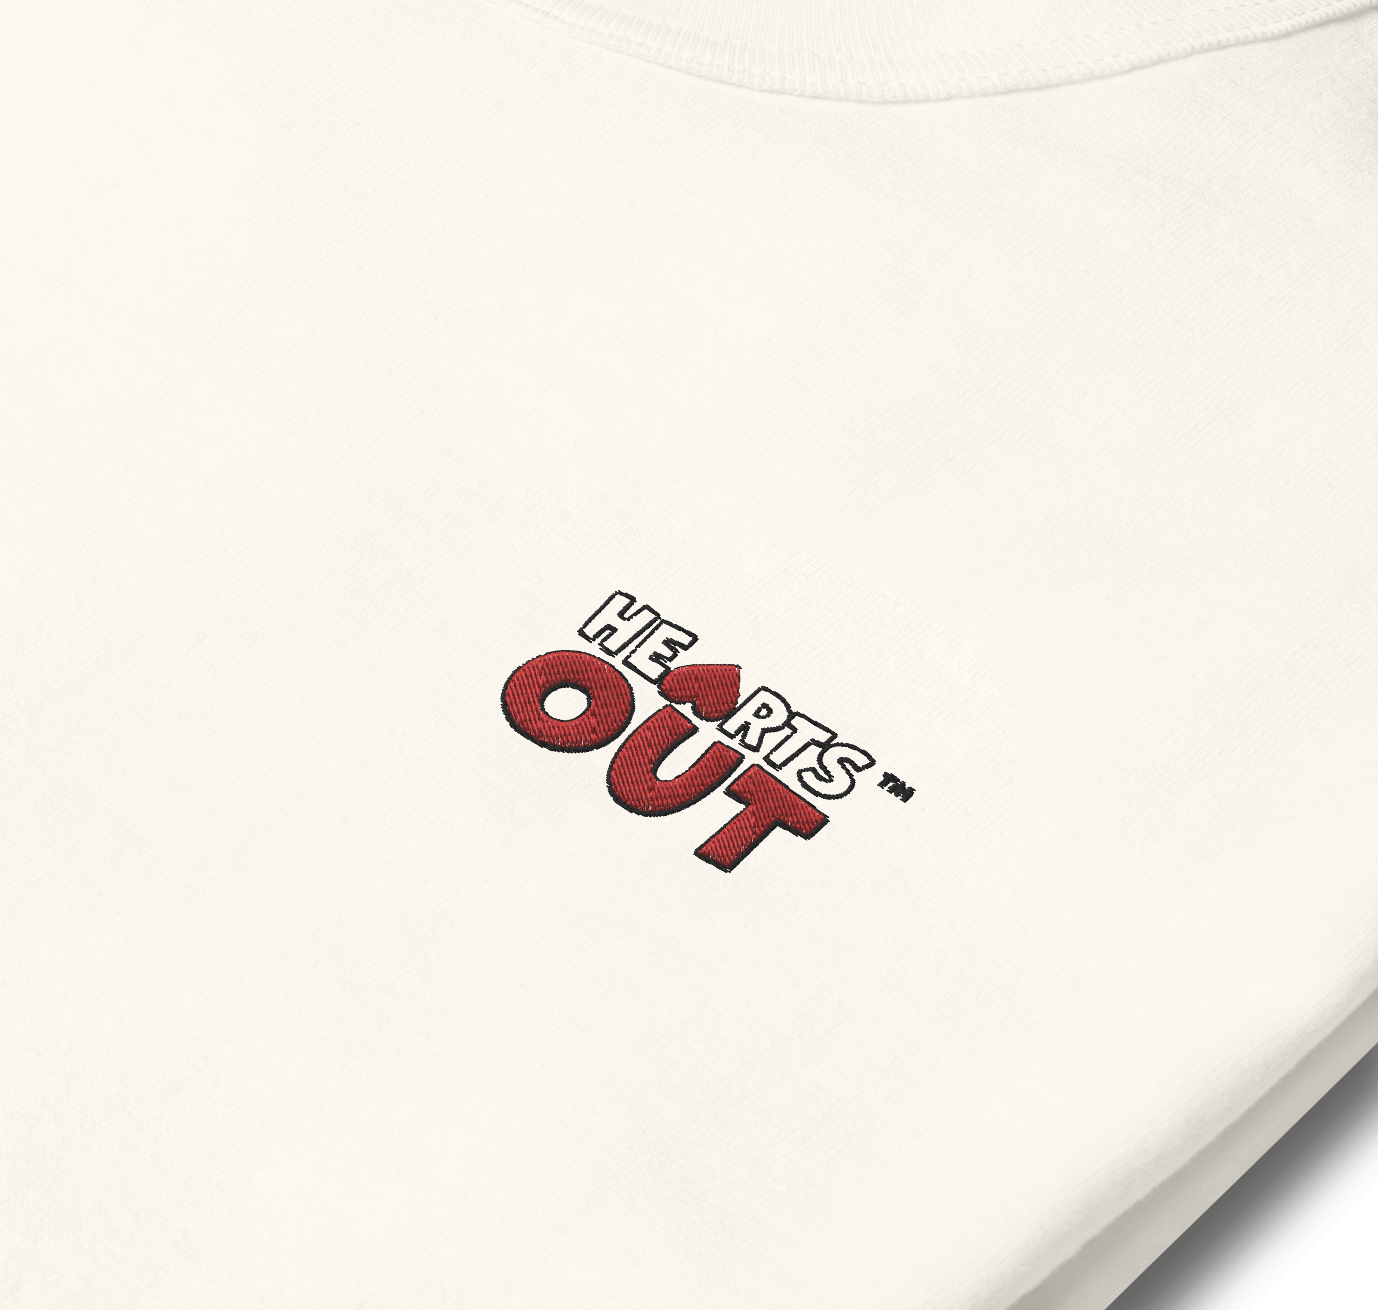 HEARTS OUT Embroidered Unisex Premium Tee